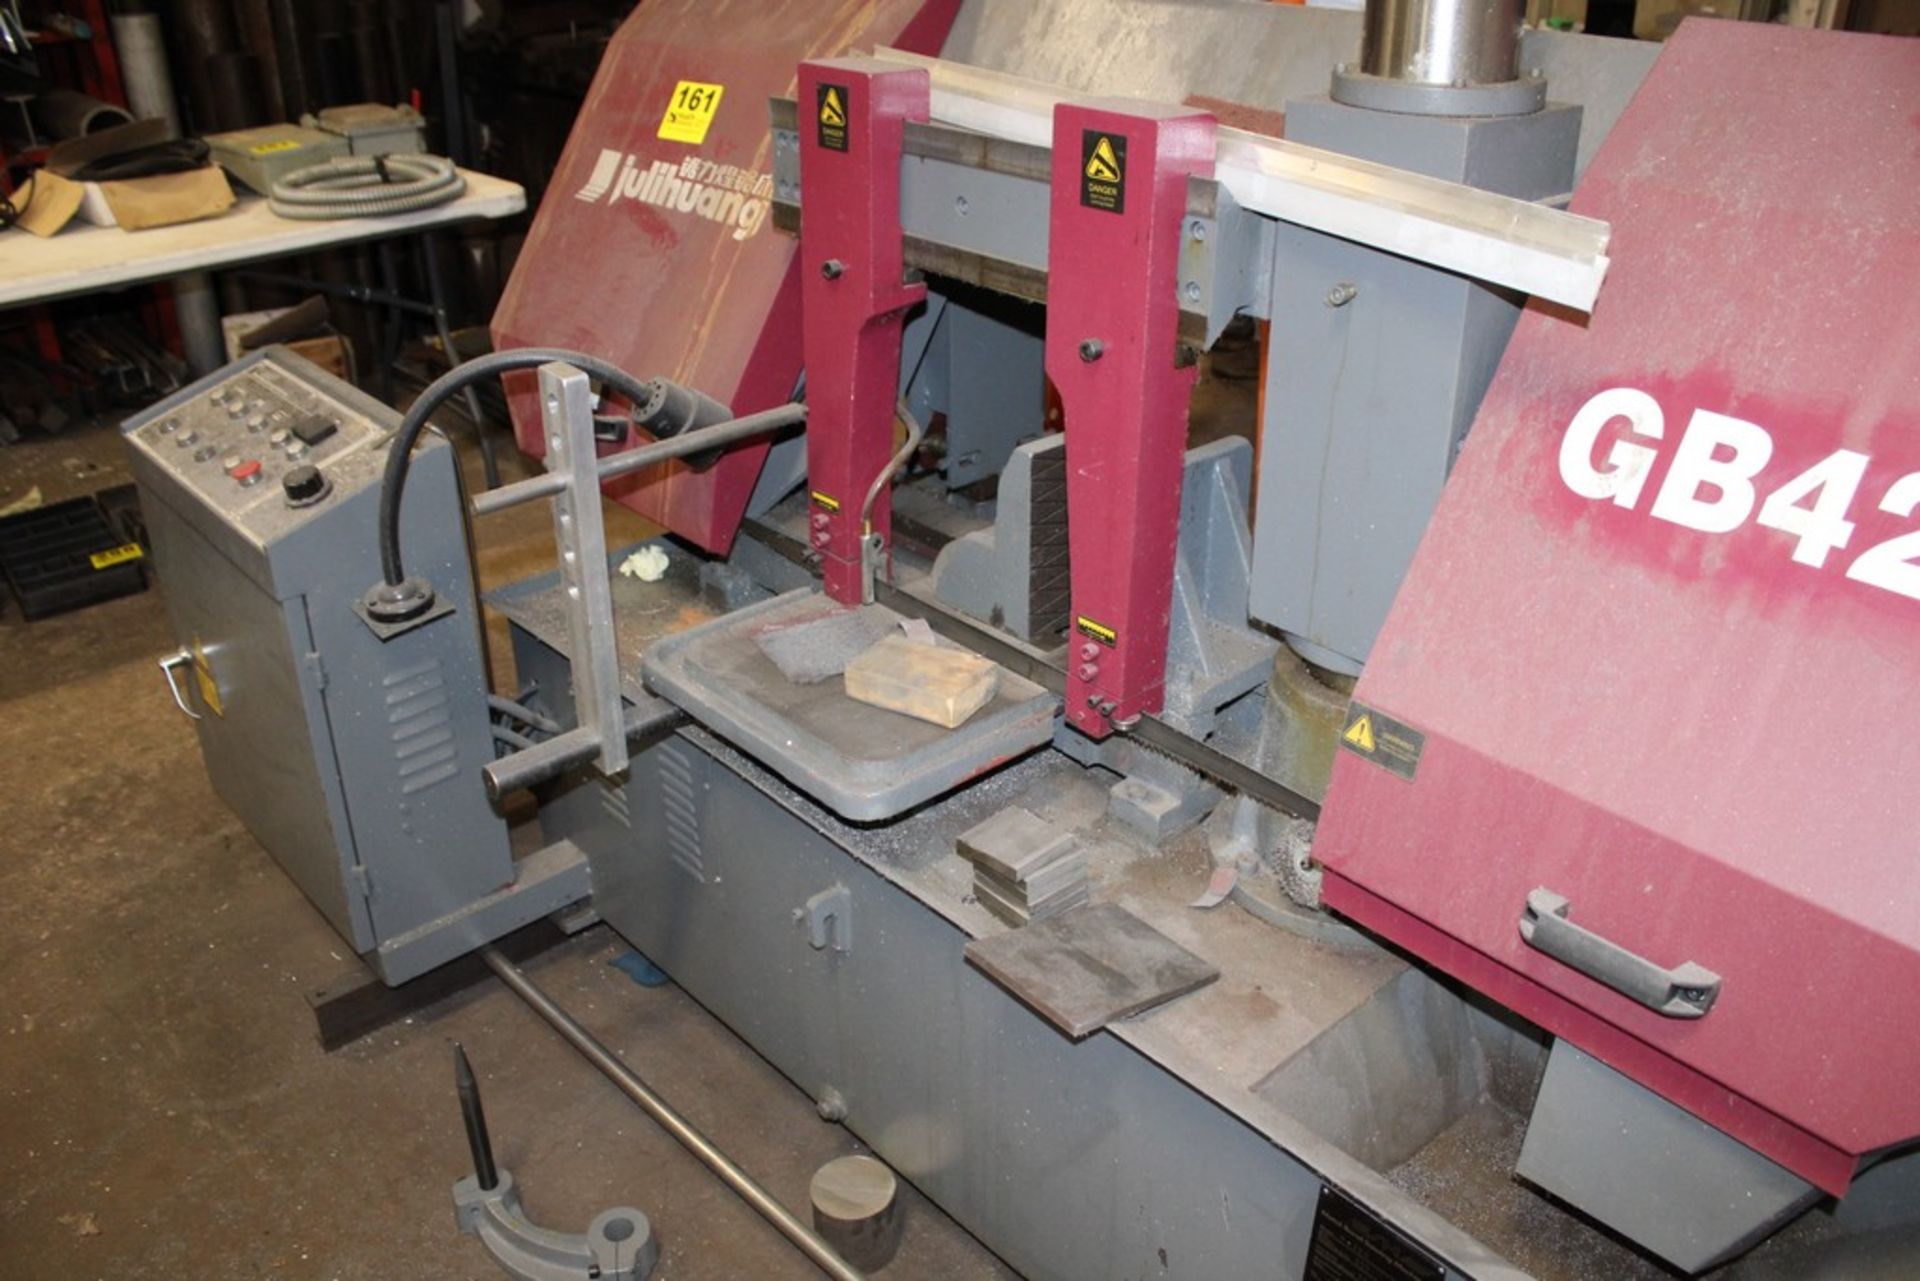 JULIHUANG 13-3/4” MODEL H-350 (GB4235) AUTOMATIC HORIZONTAL BAND SAW, S/N 4B566, APPROX. 13-3/4” - Image 5 of 9